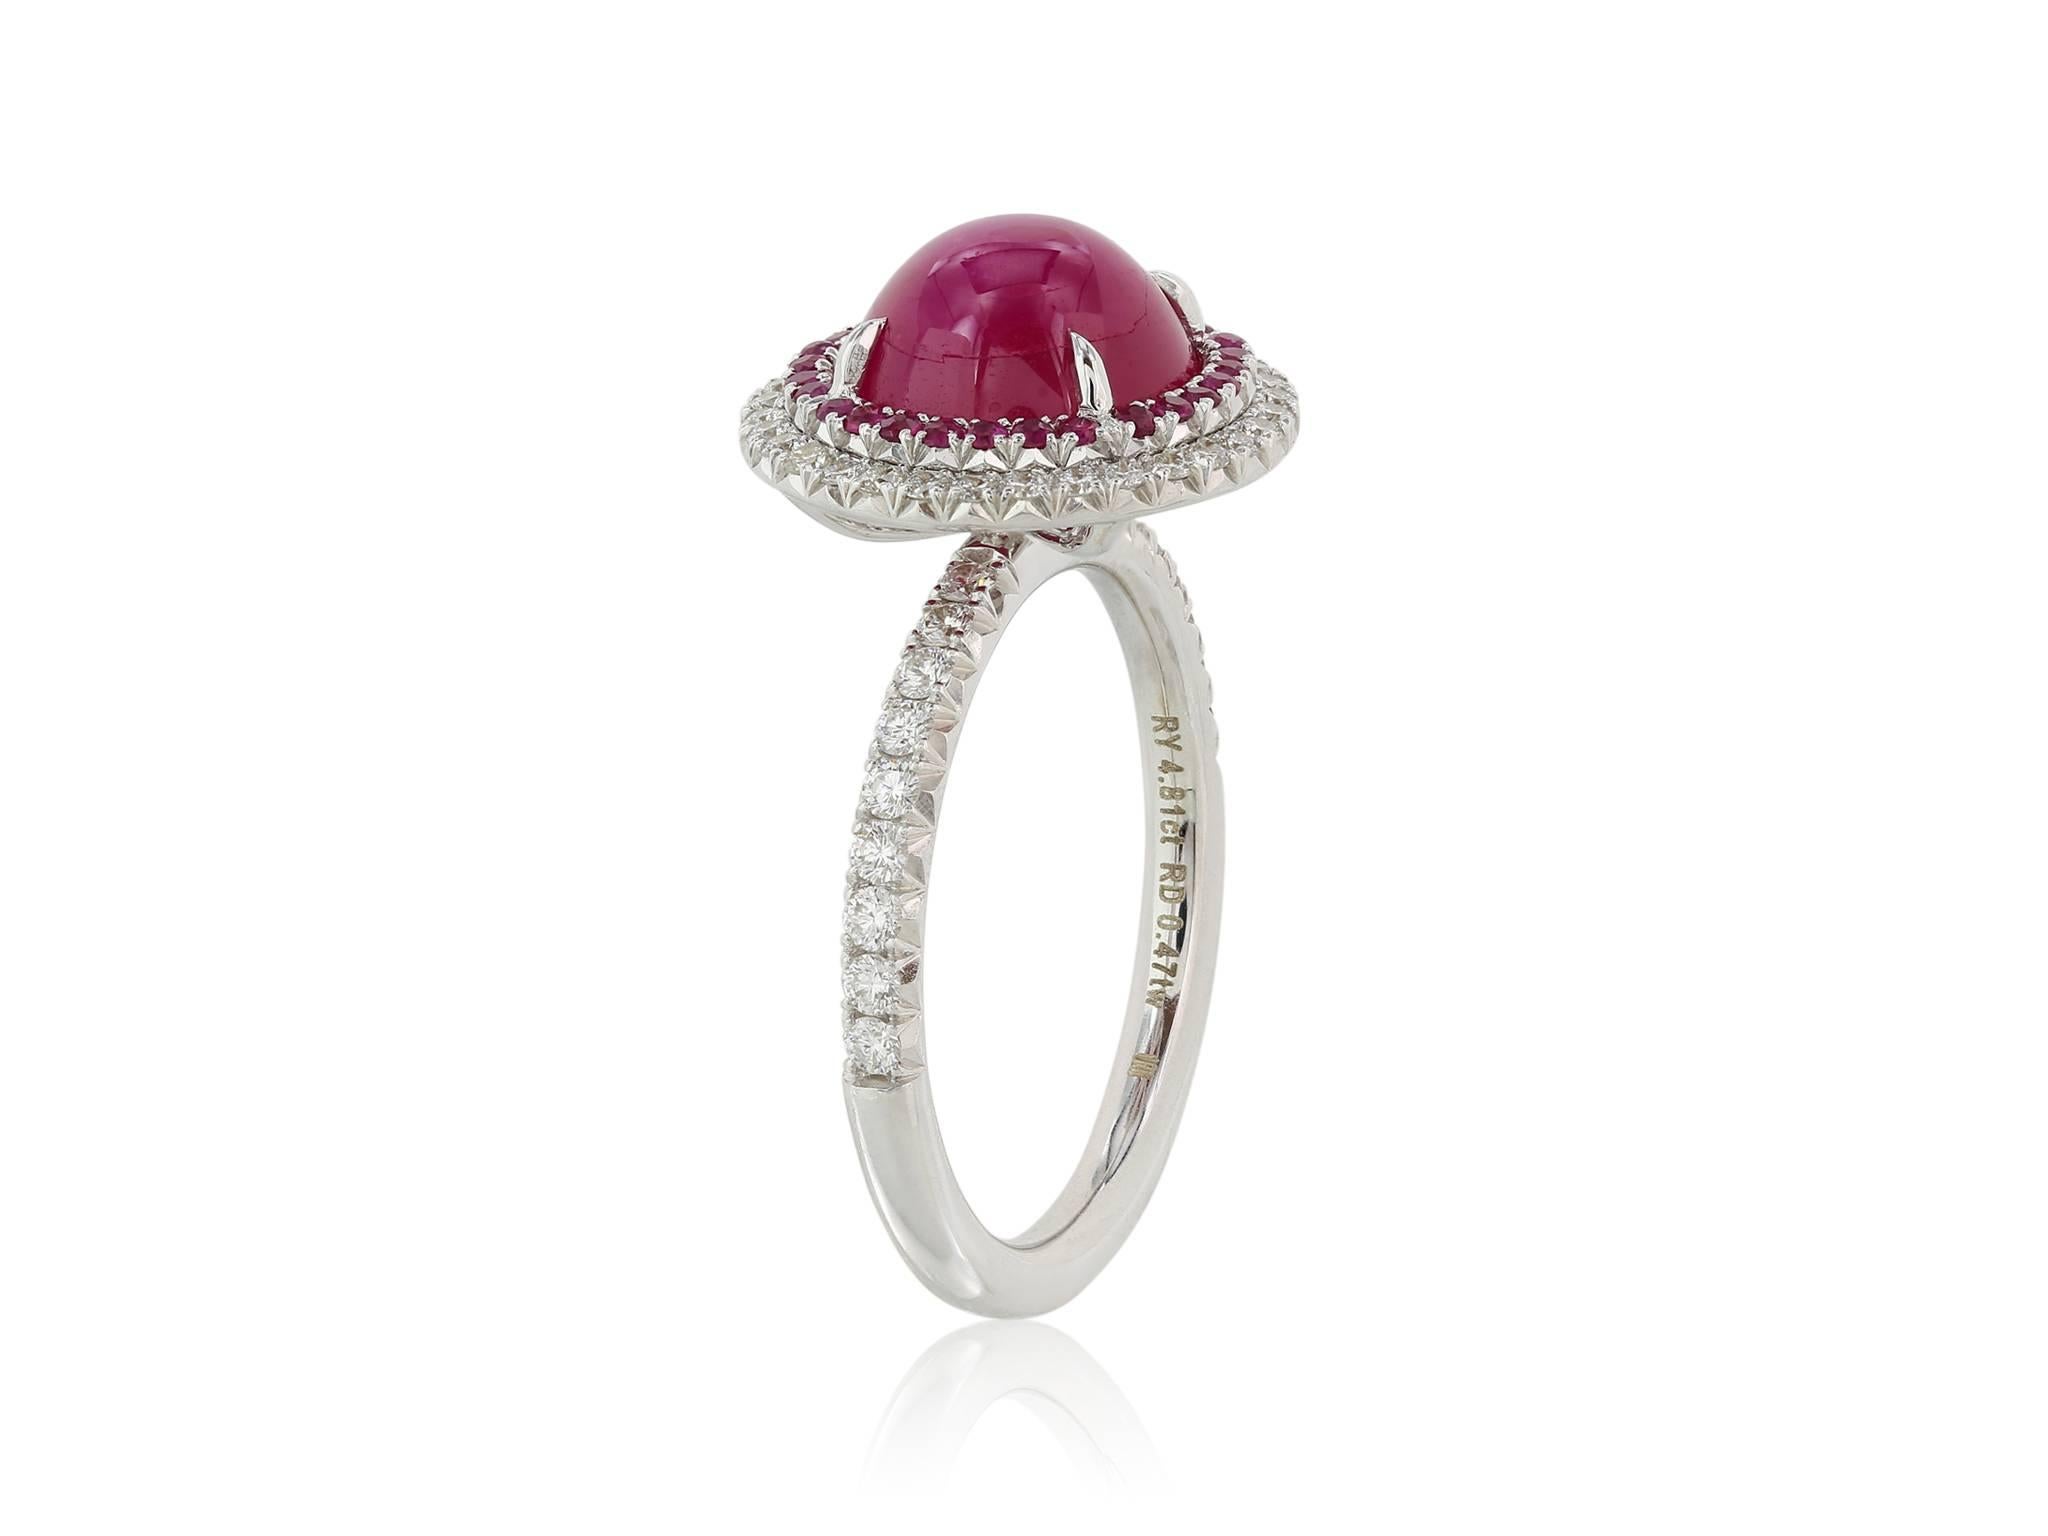 18 karat white gold ring consisting of 1 cabochon Burmese ruby weighing 4.81 carats surrounded by a halo of round rubies weighing .20 carats and shadowed by a row of round brilliant diamonds extending down the shank weighing .47 carats with a color